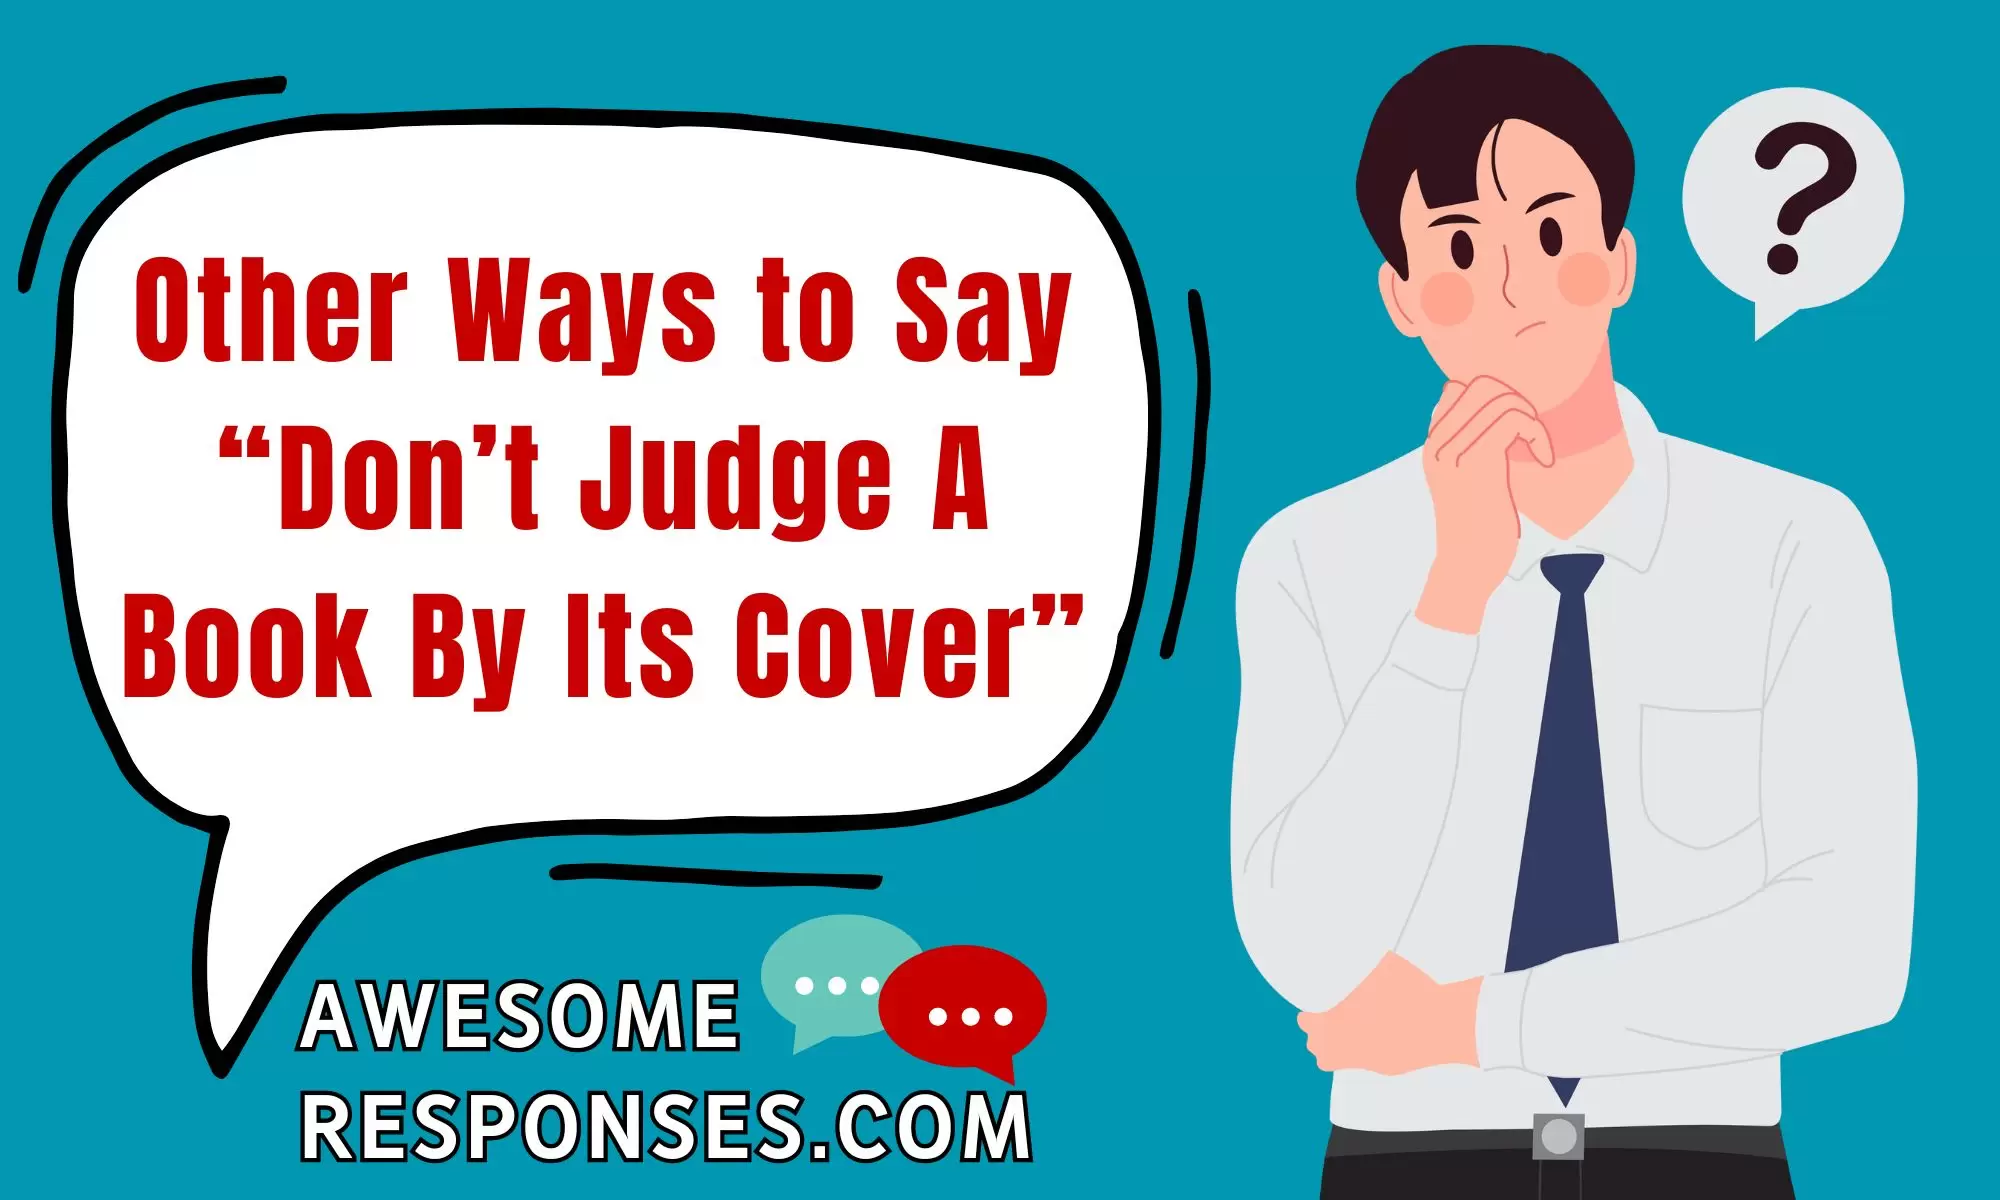 Other Ways to Say “Don’t Judge A Book By Its Cover”